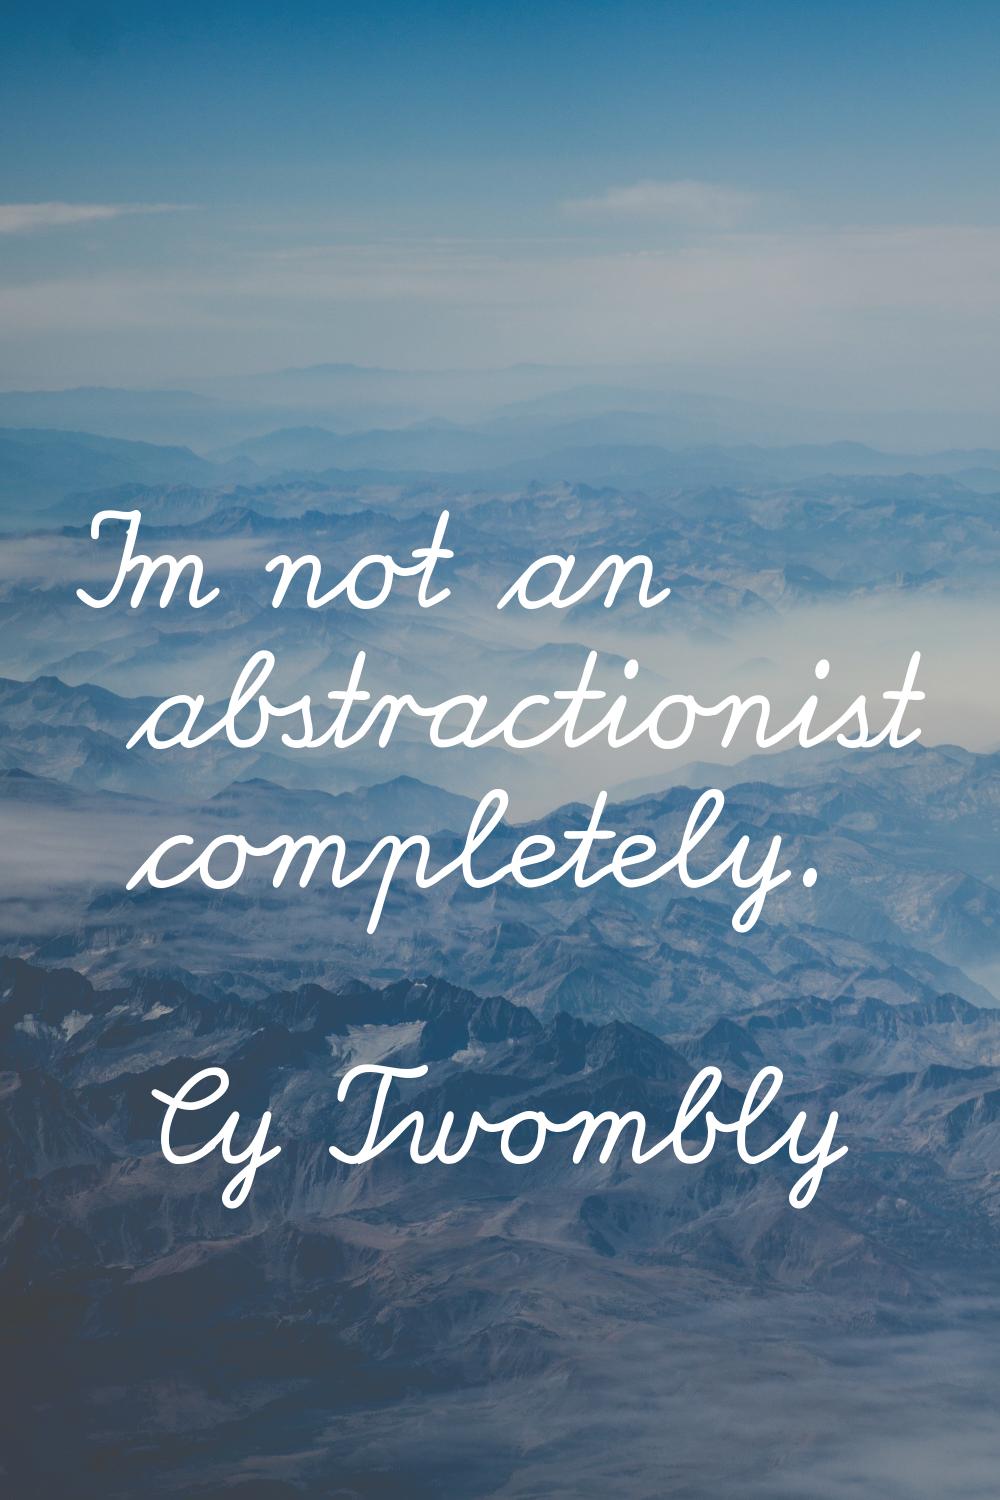 I'm not an abstractionist completely.